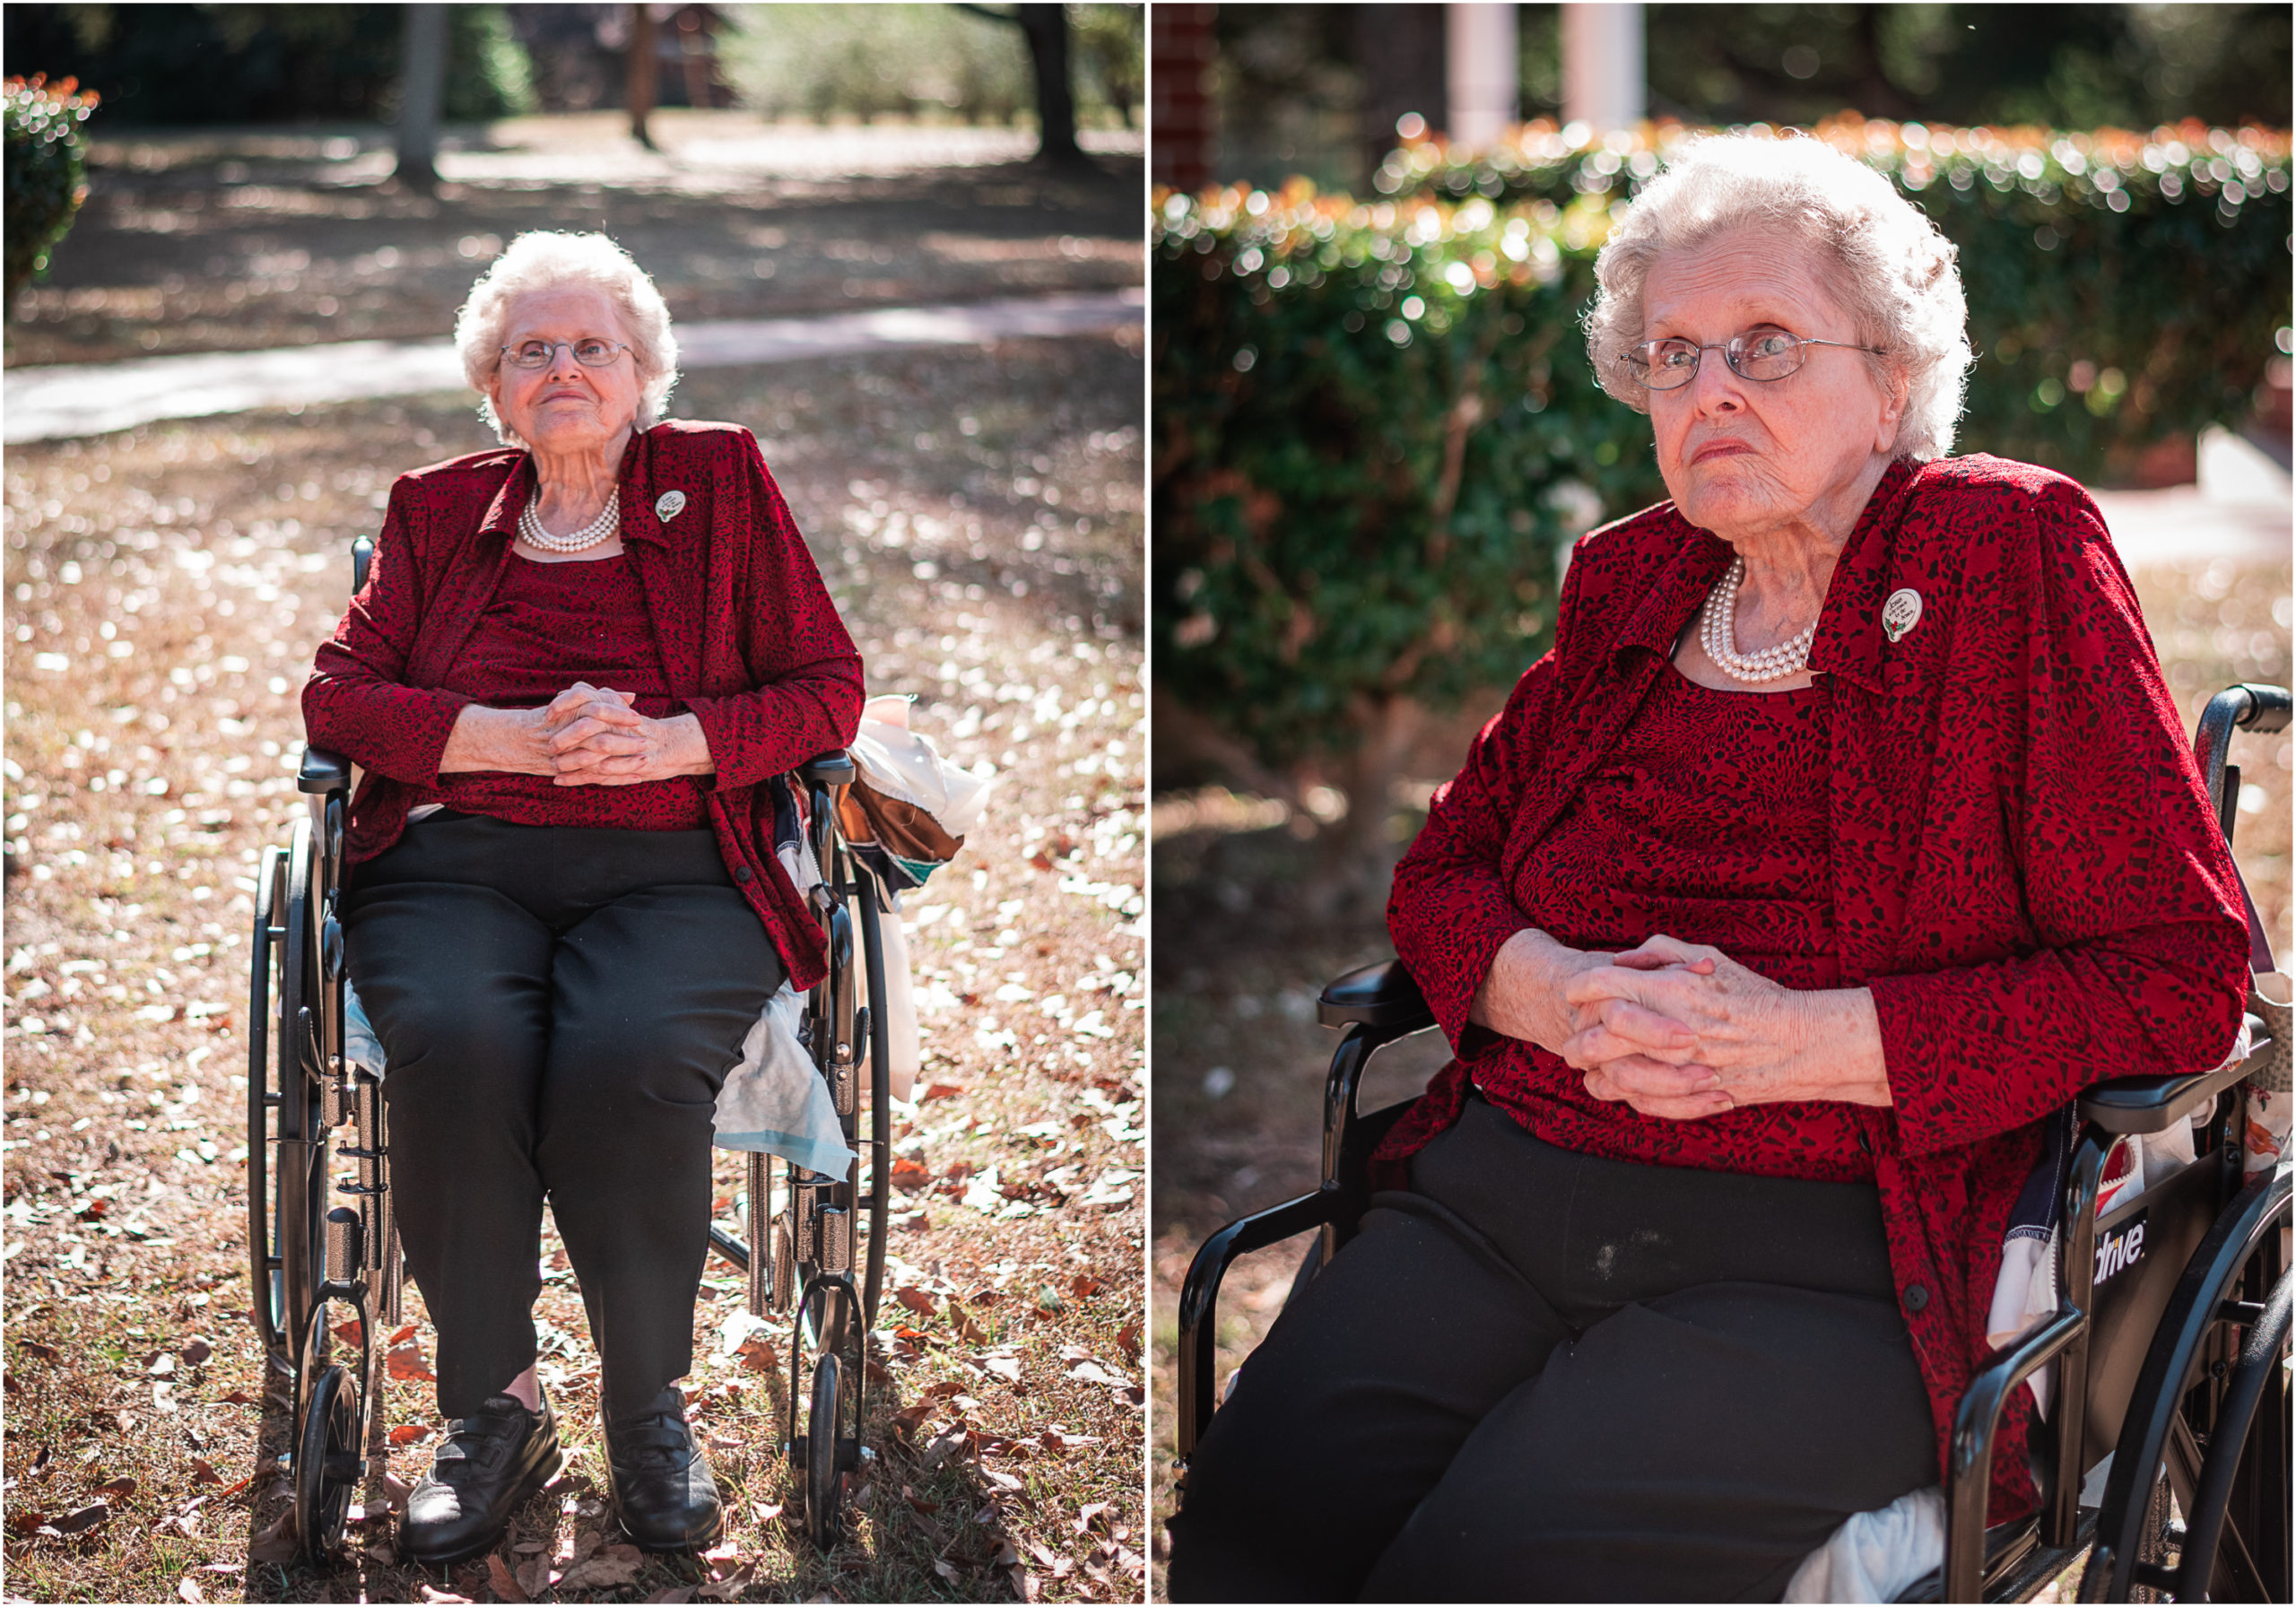 A collage of my grandmother ourdoors on a sunny Christmas day.